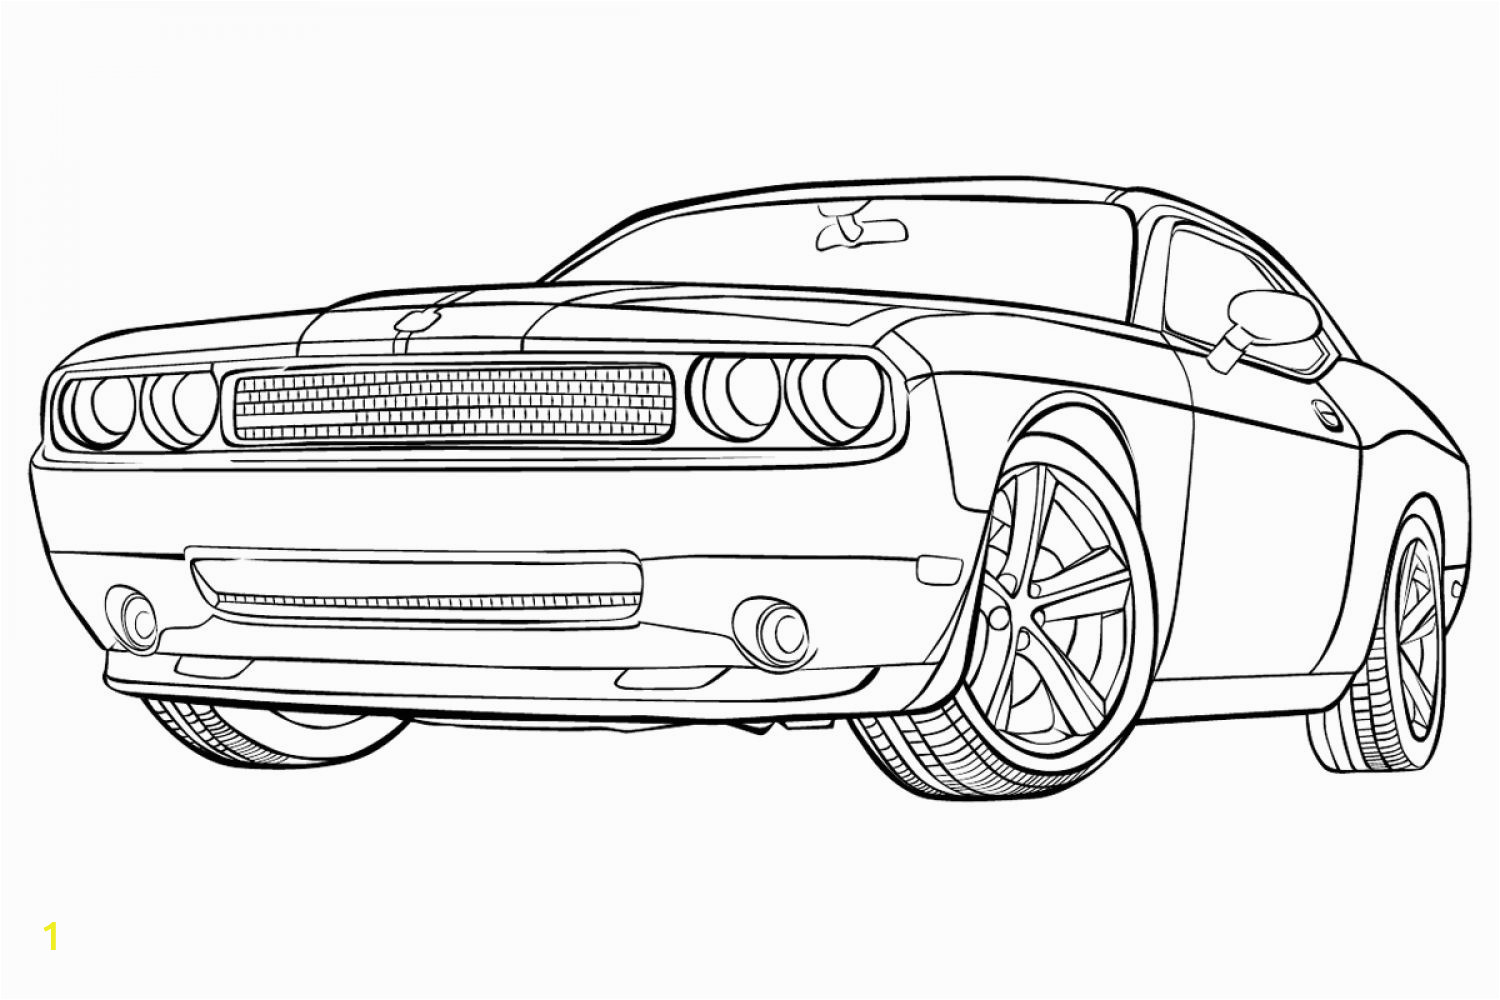 Muscle Car Coloring Pages to Print Muscle Car Coloring Pages to and Print for Free